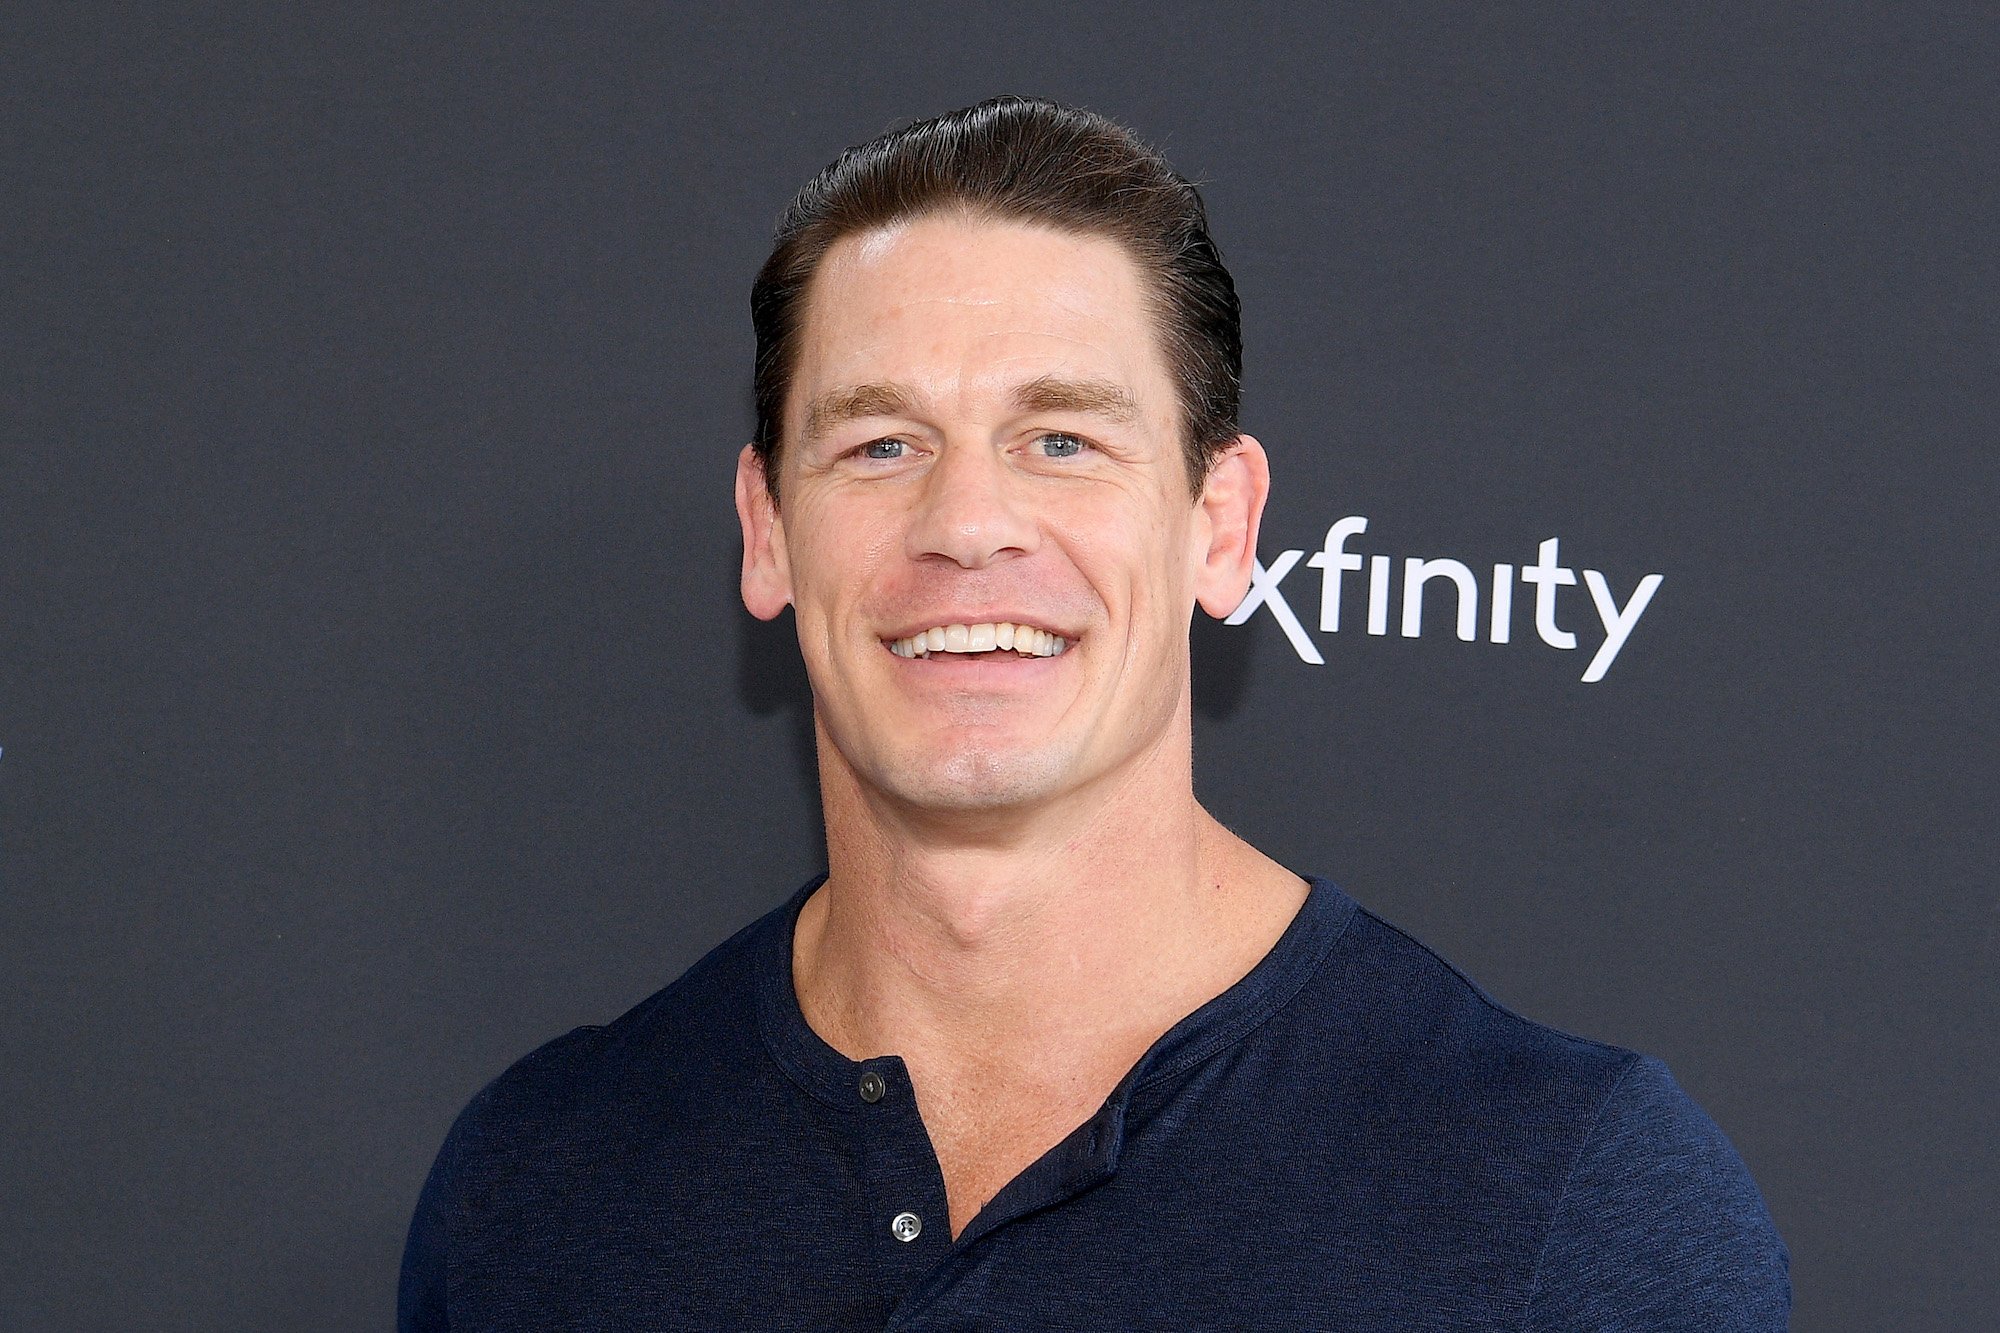 John Cena smiling in front of a black background